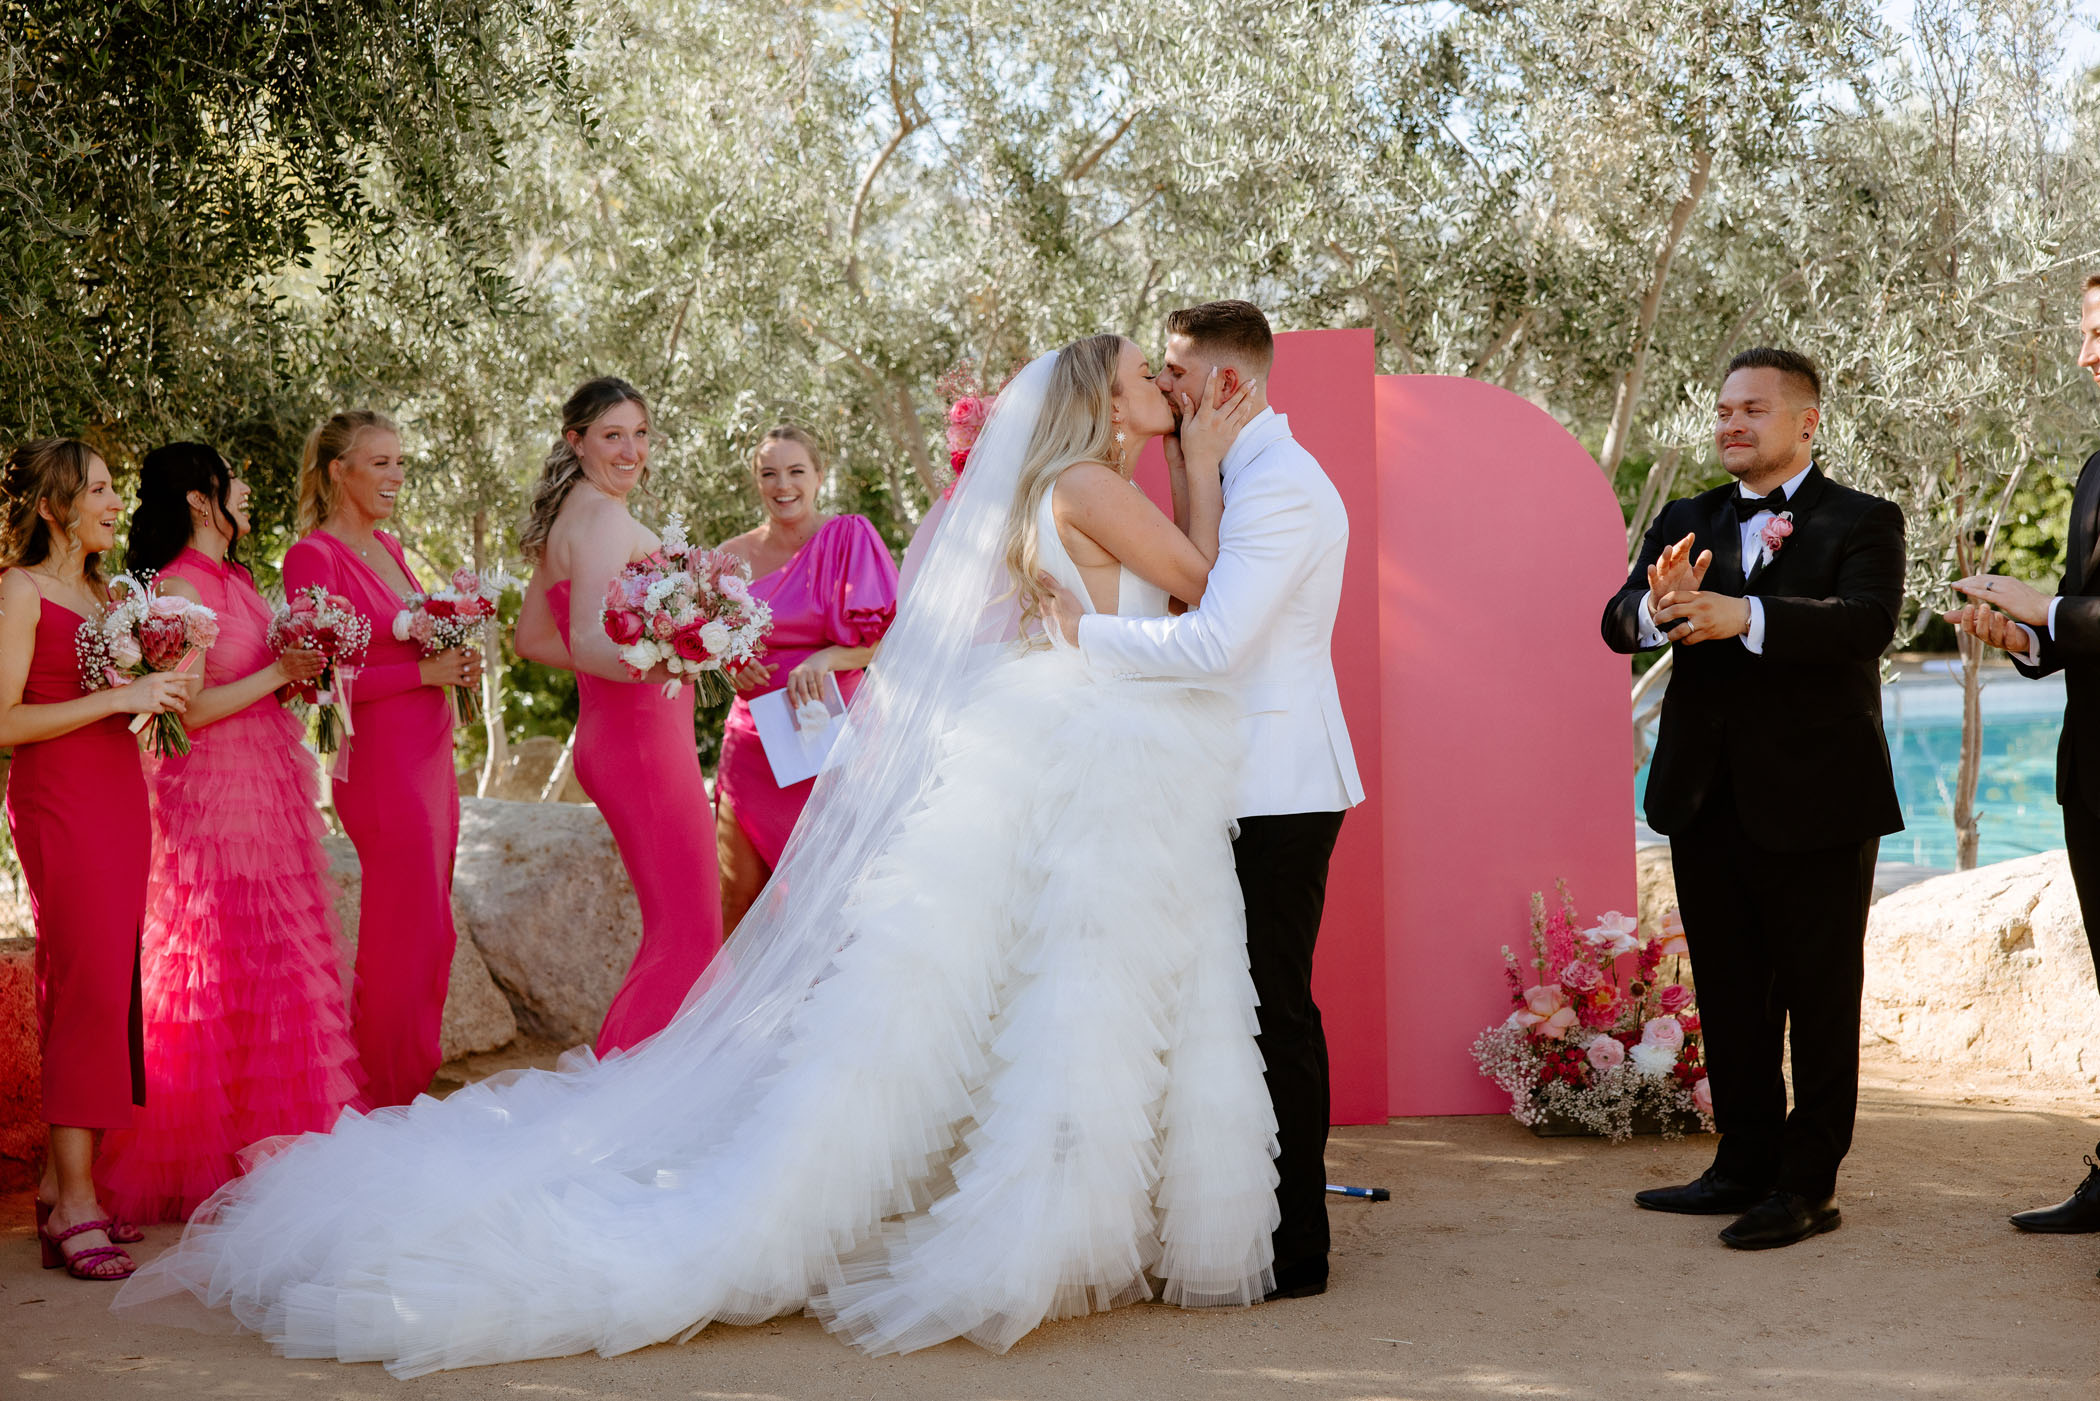 Barbie Hot Pink Wedding at the Ace Hotel Palm Springs Pink Ceremony